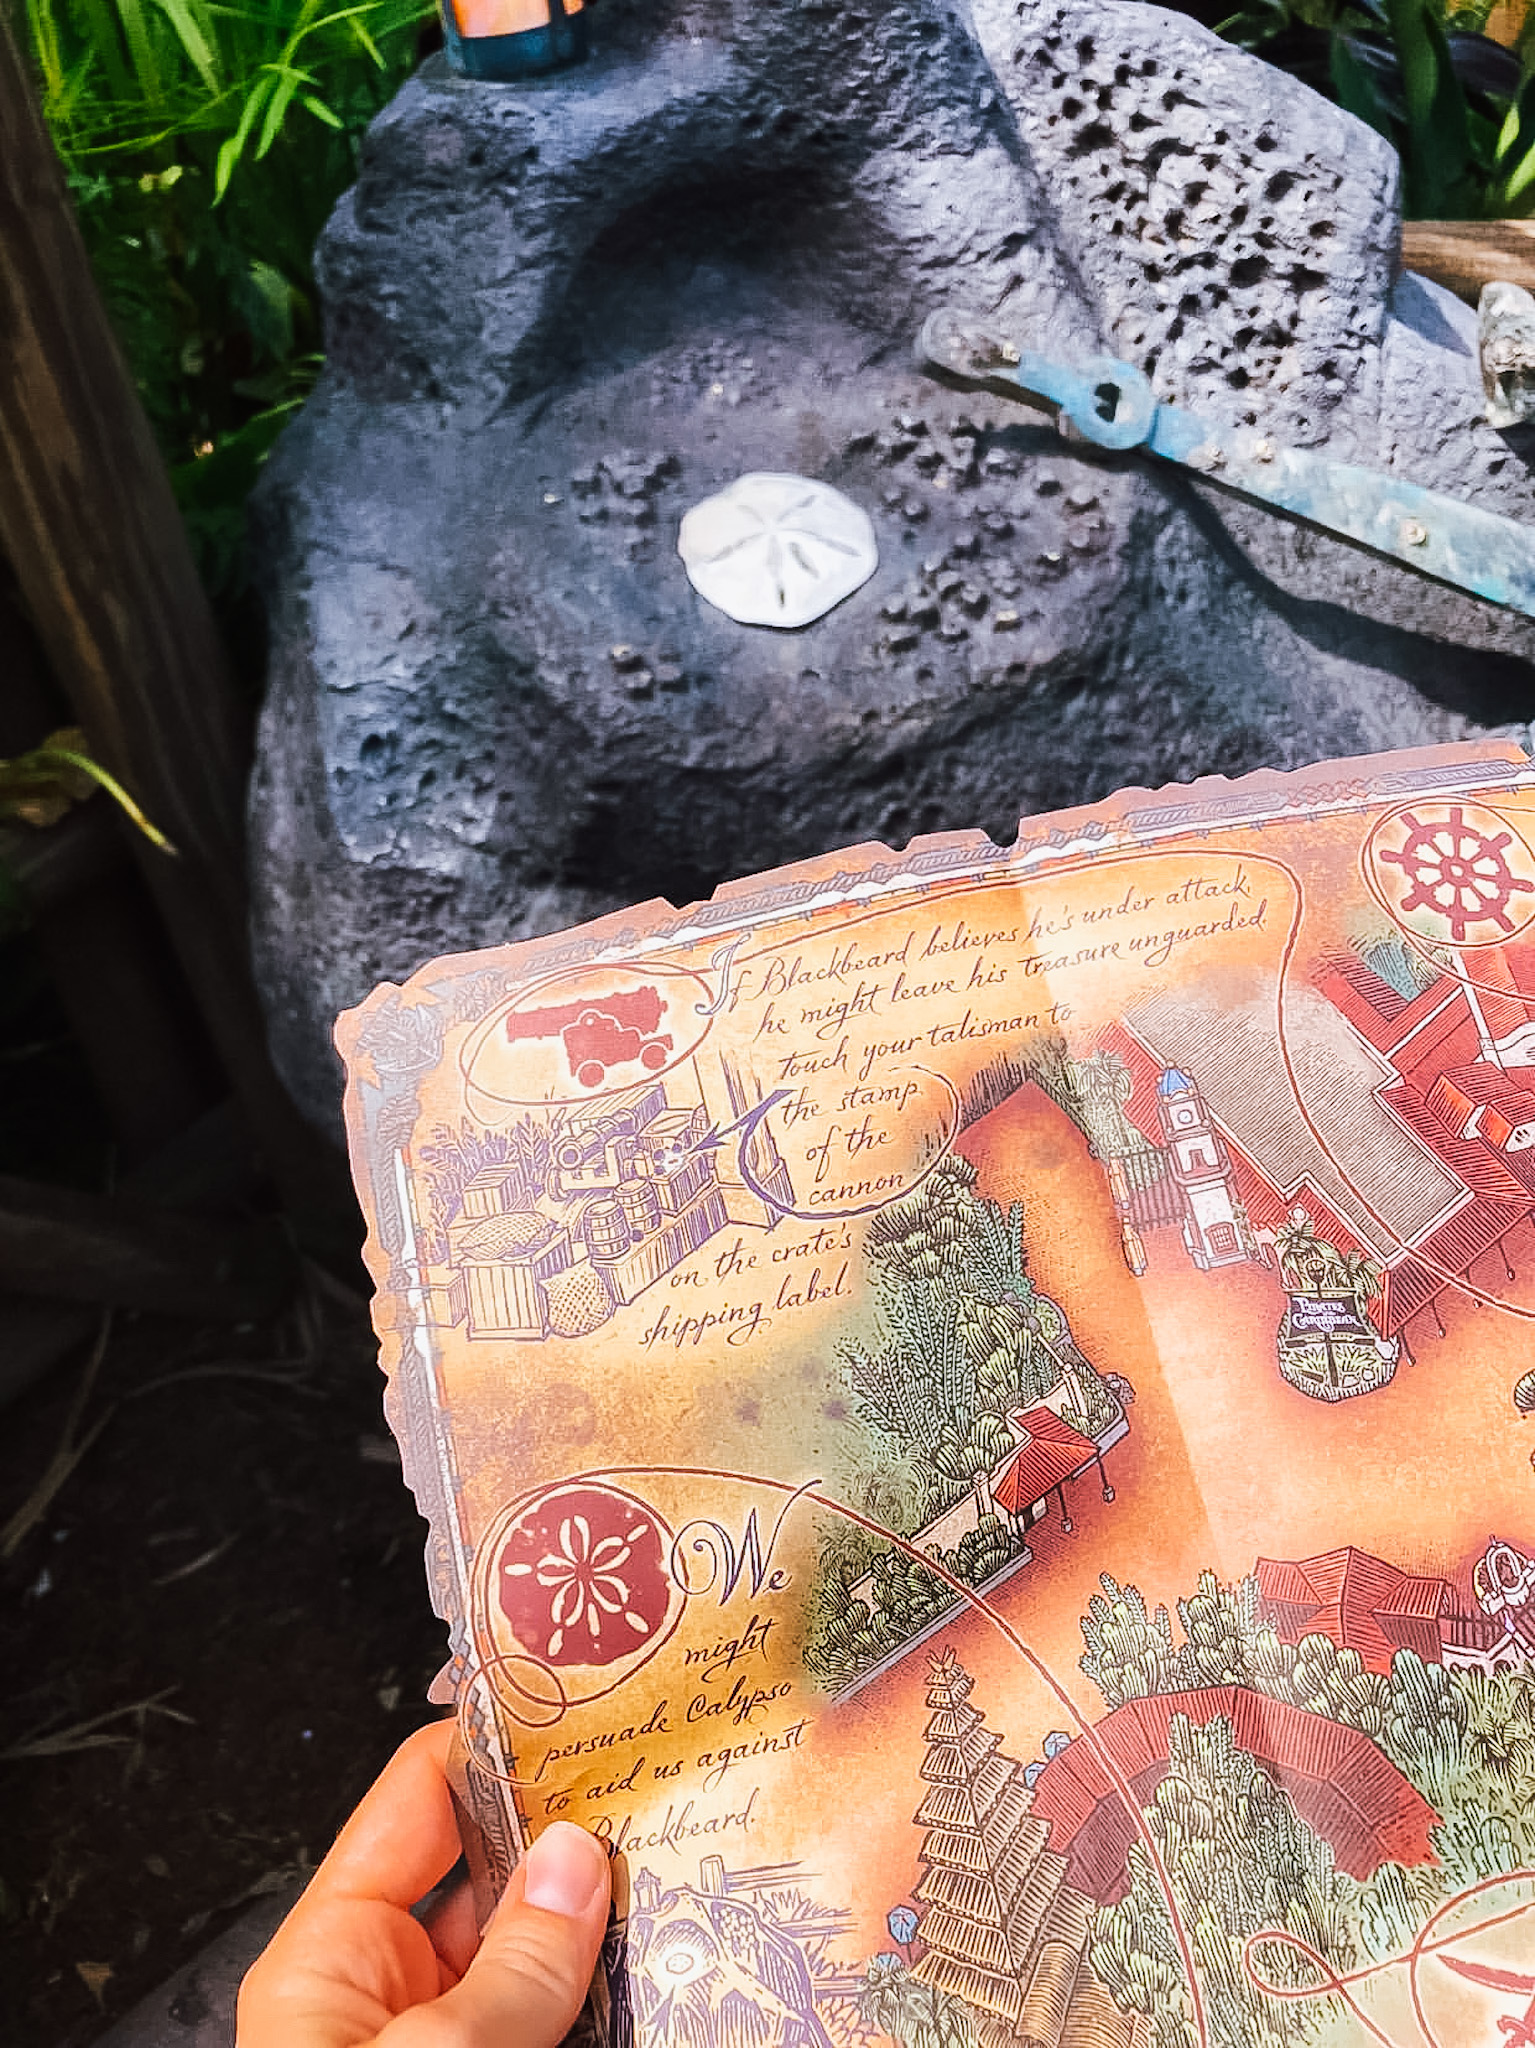 A Pirate’s Adventure – Treasures of the Seven Seas map with rock behind